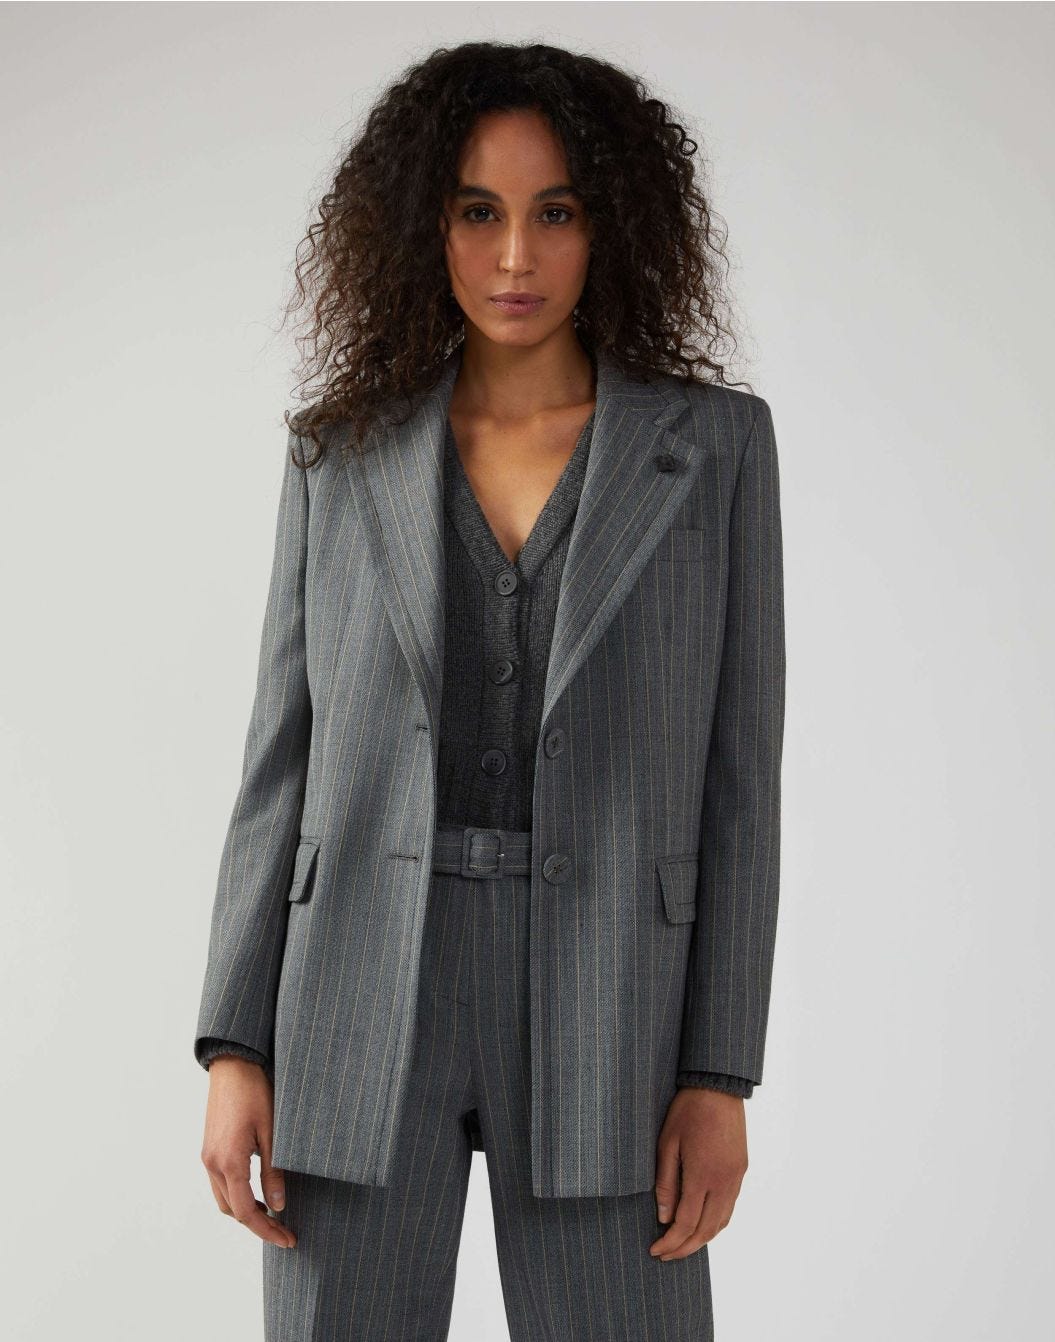 Single-breasted pinstripe jacket in grey and beige 